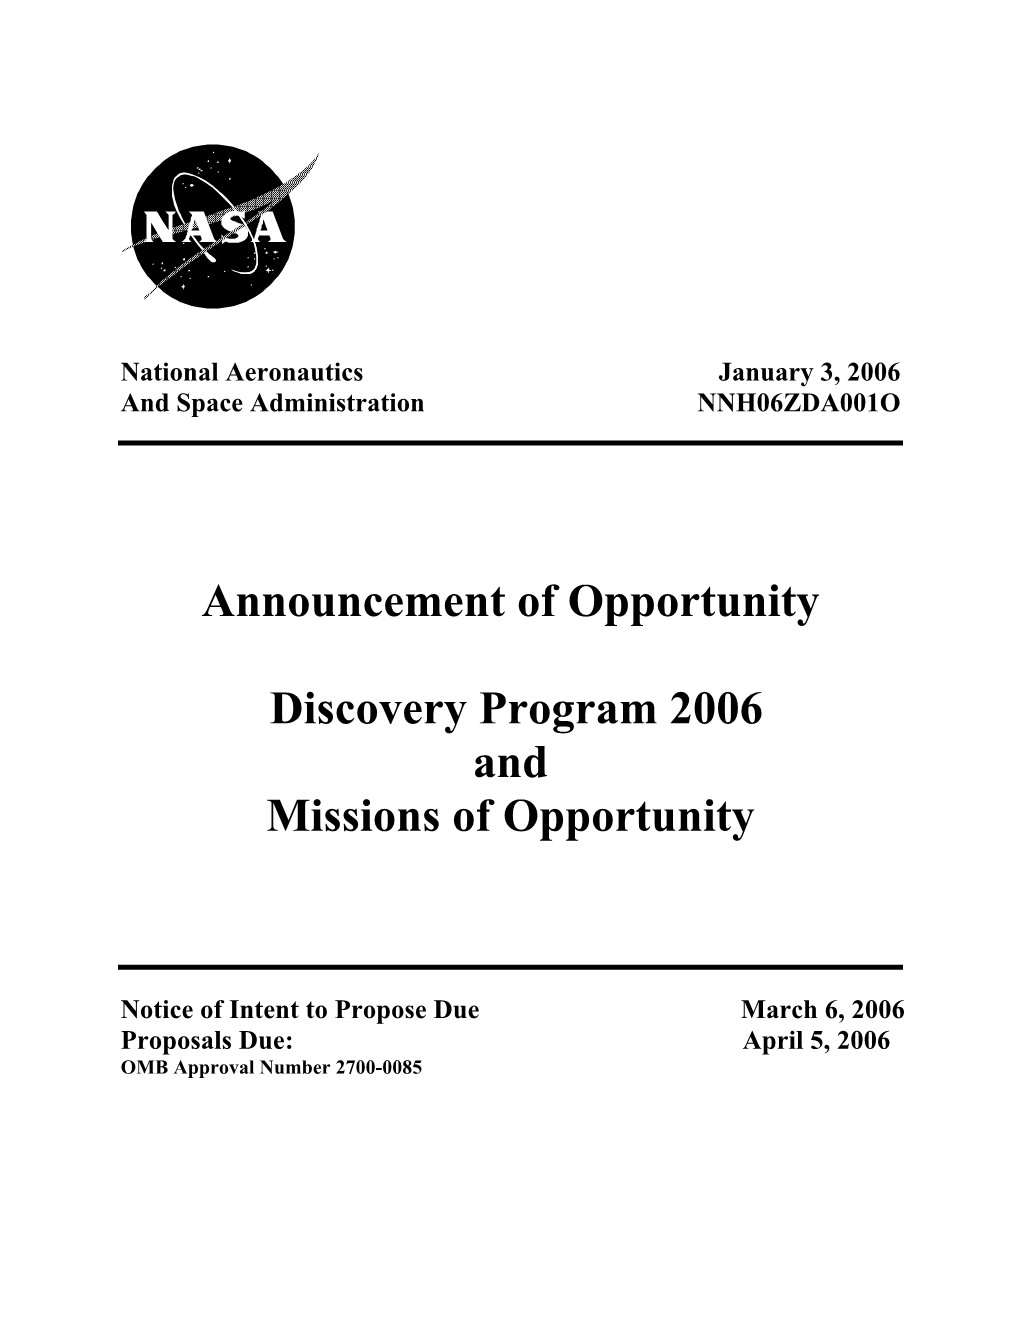 Announcement of Opportunity Discovery Program 2006 And